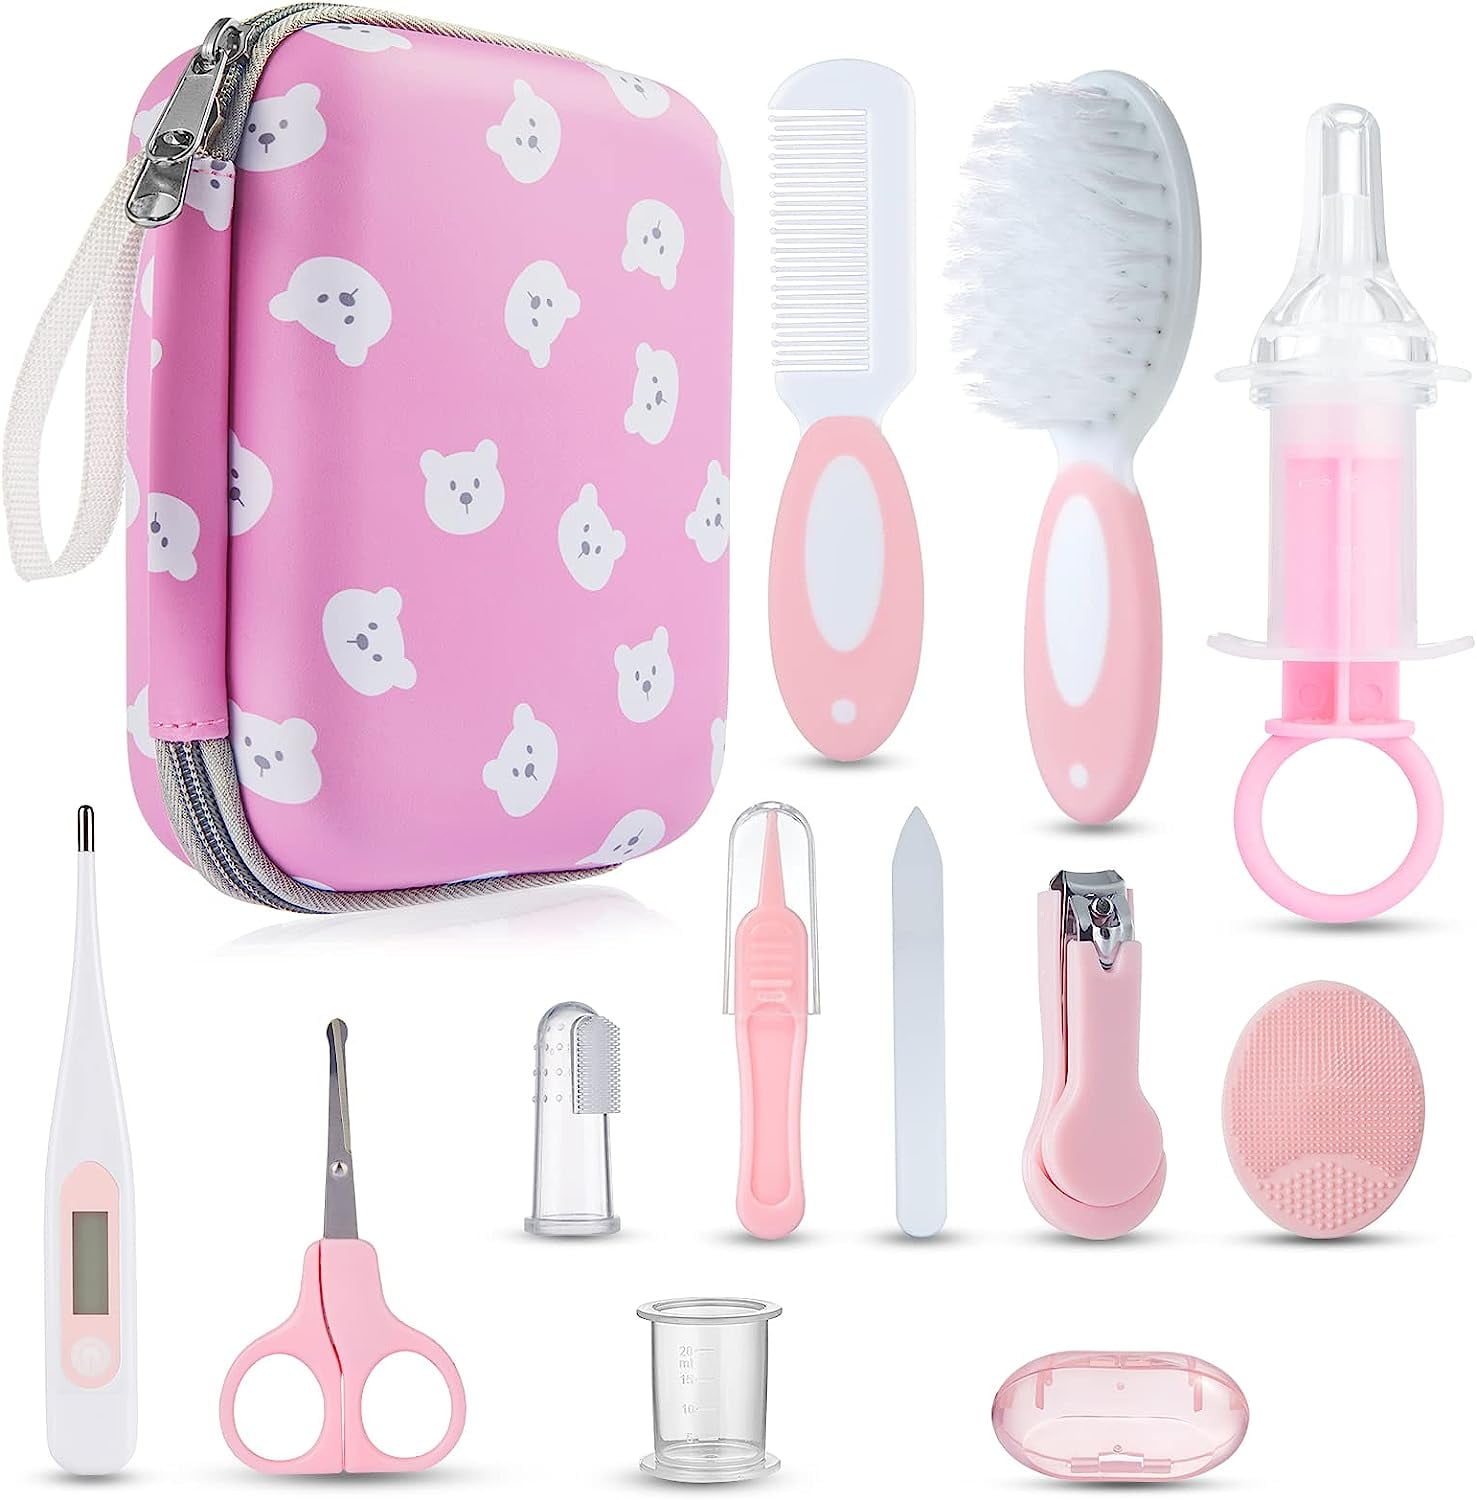 Baby Healthcare and Grooming Kit, Lictin Newborn Nursery Safety Health Care  Set for Newborn Infant Toddlers Baby Girls, Pink 